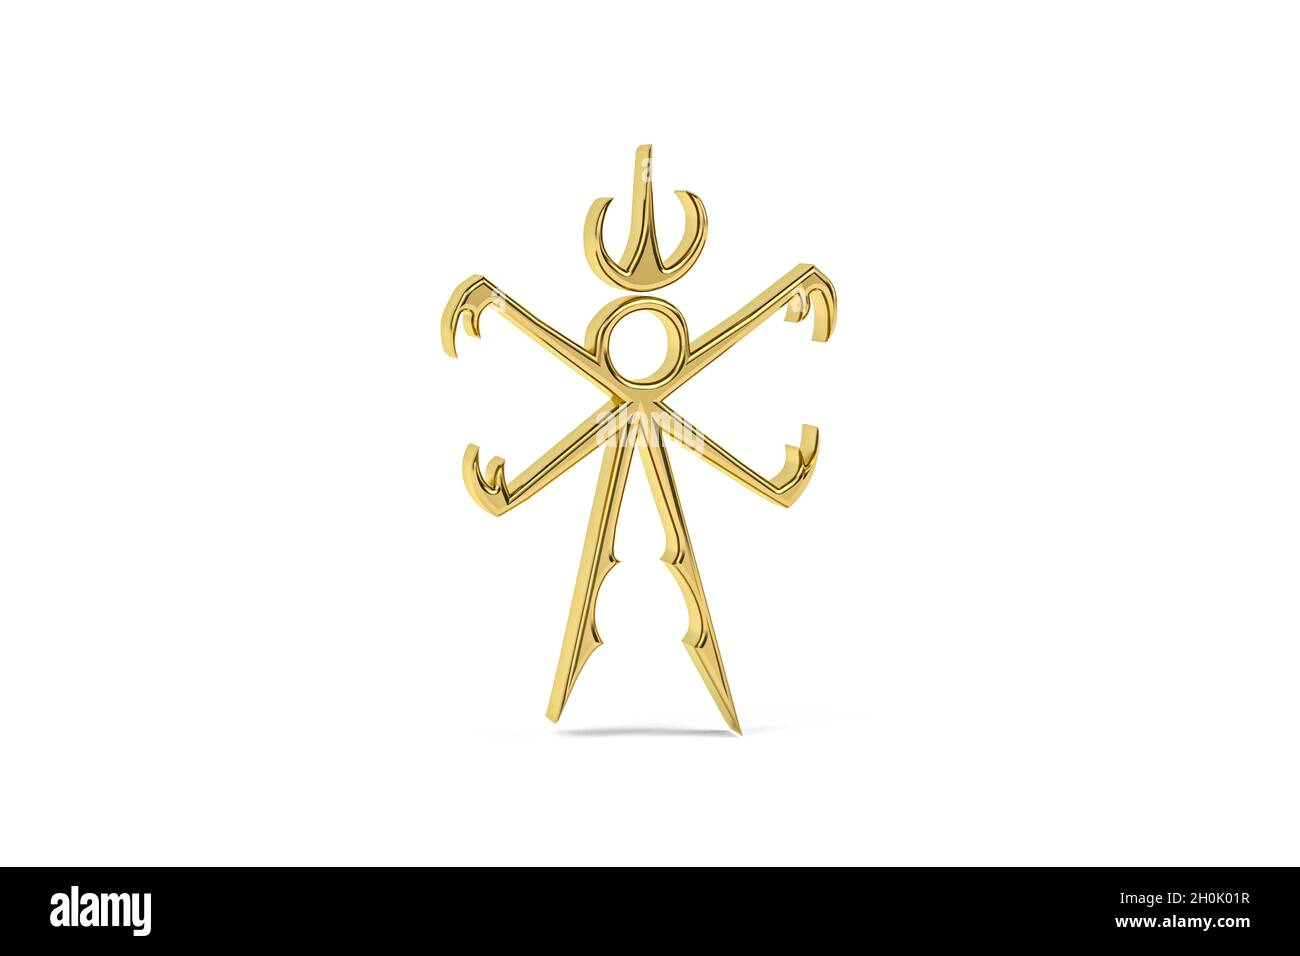 Golden satanism icon isolated on white background - 3D render Stock Photo